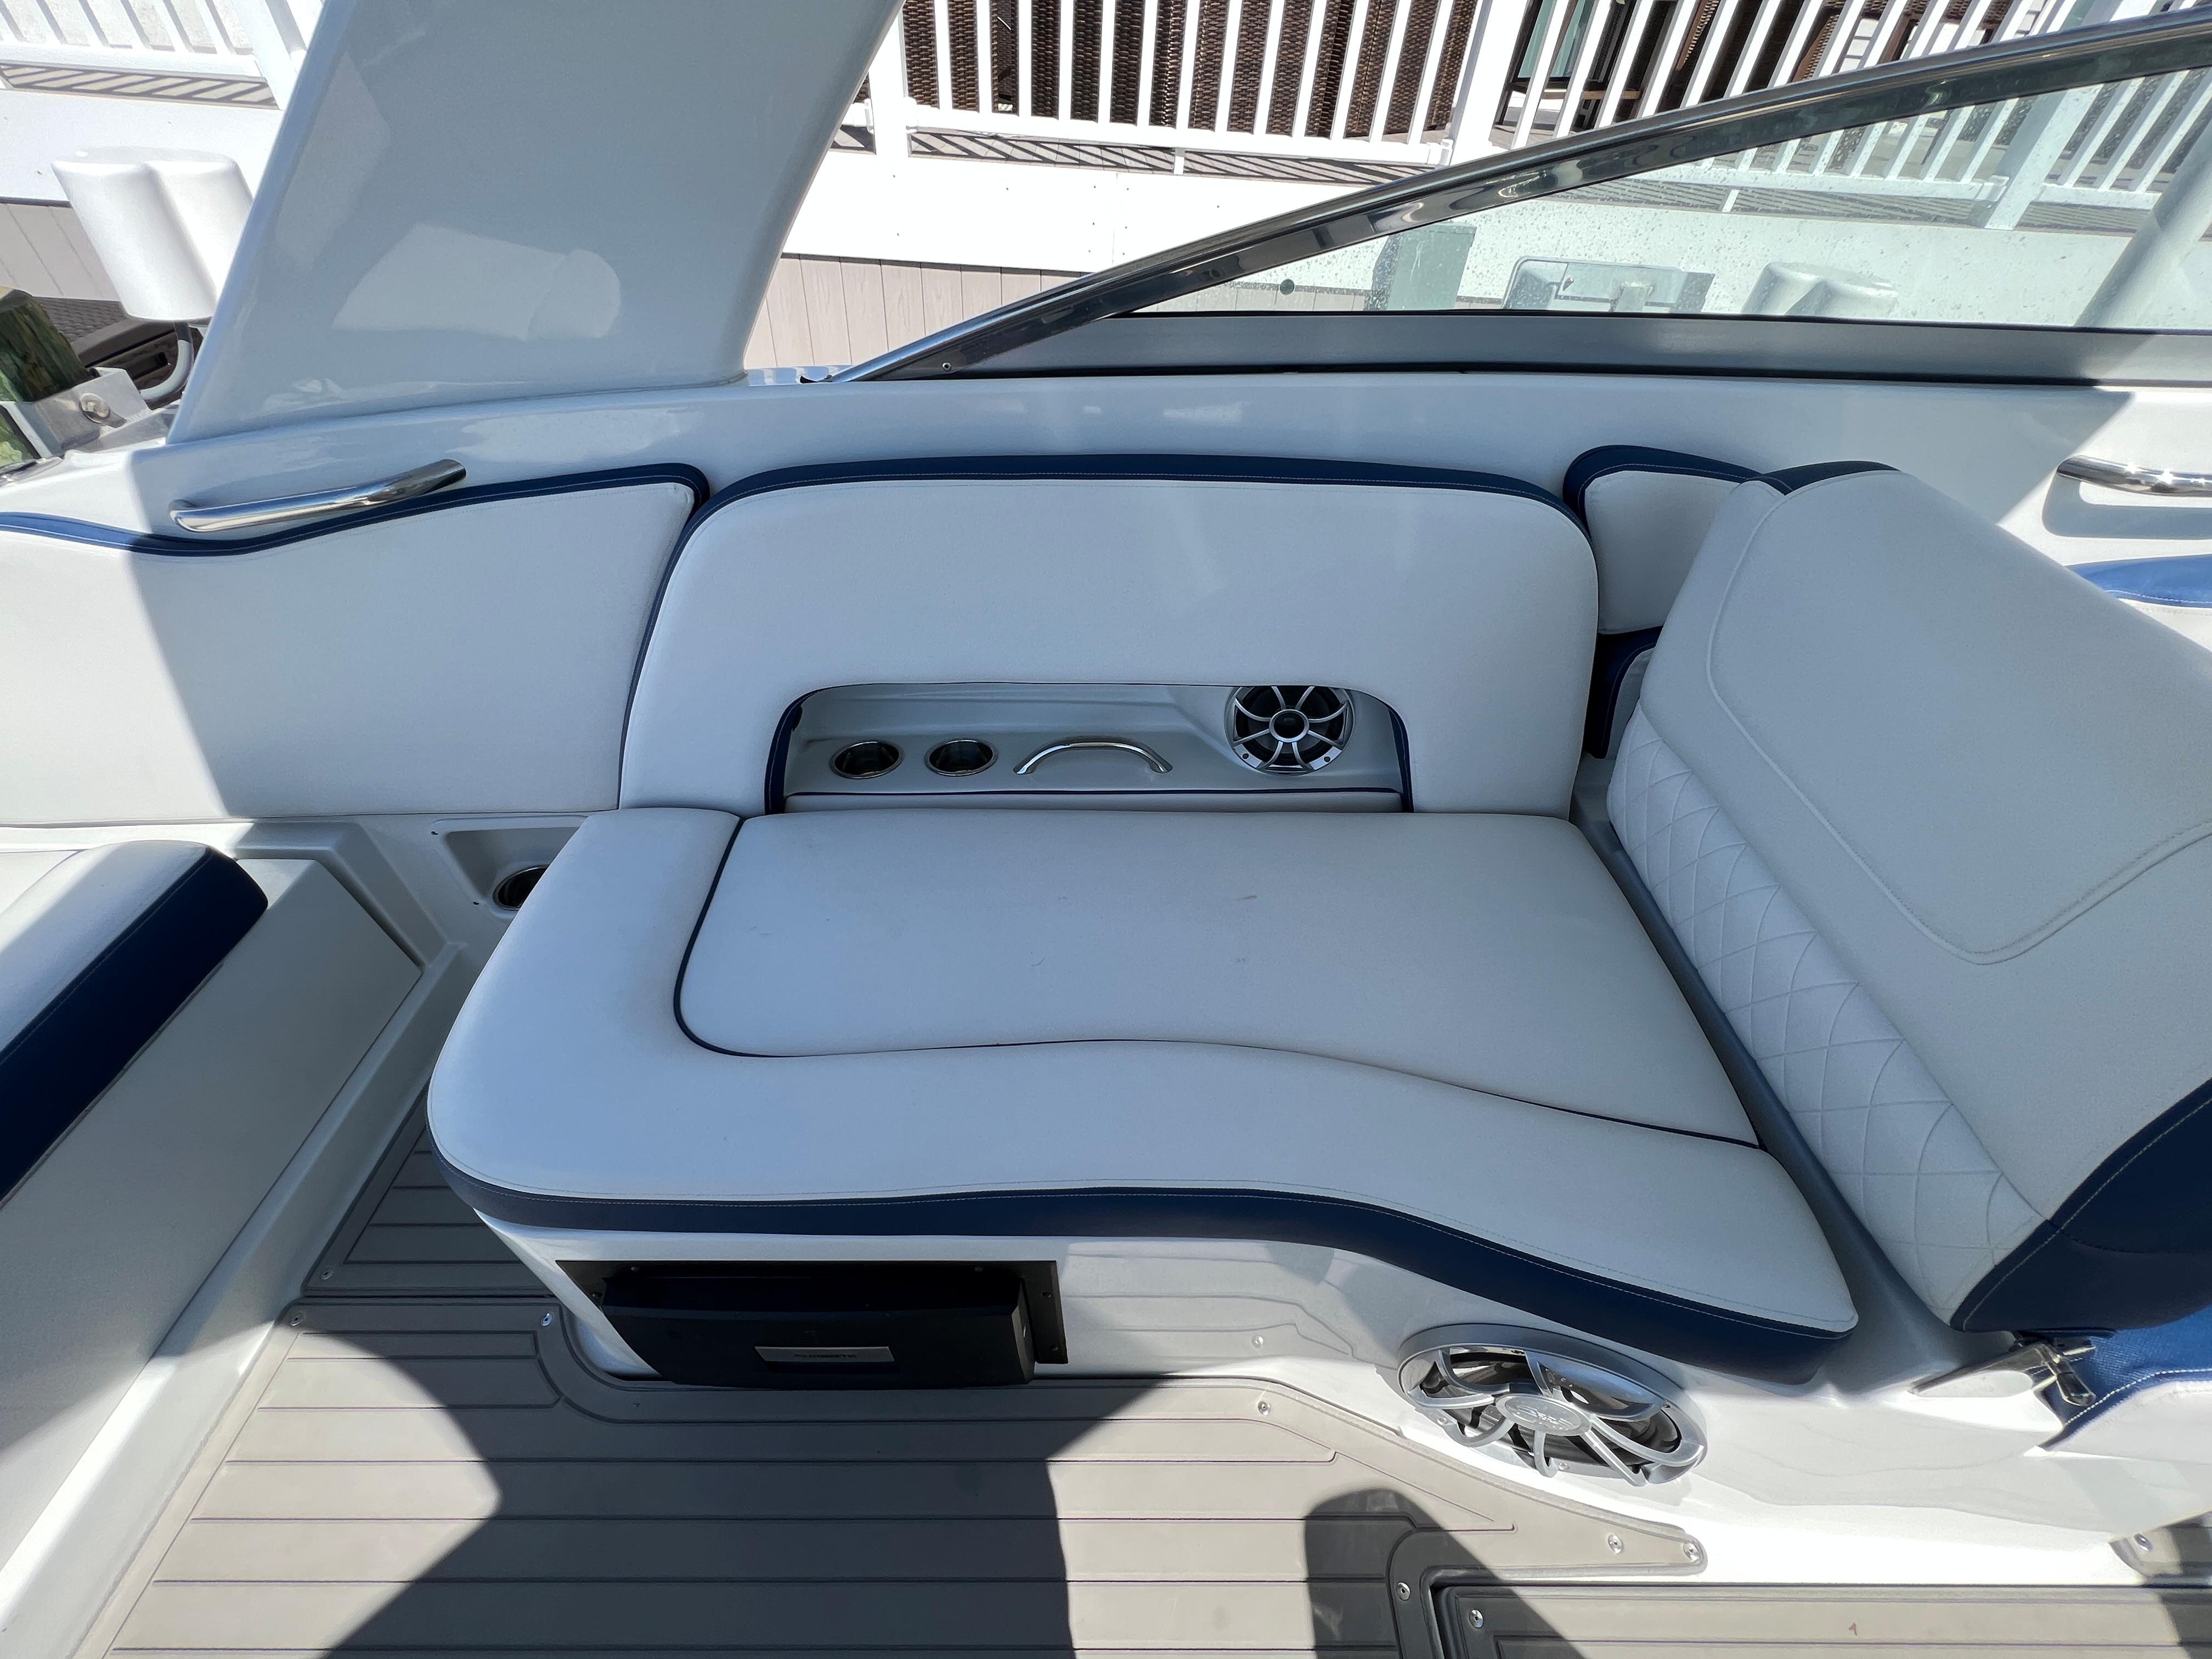 2022 Crownline E305 XS Starboard Cockpit Seating